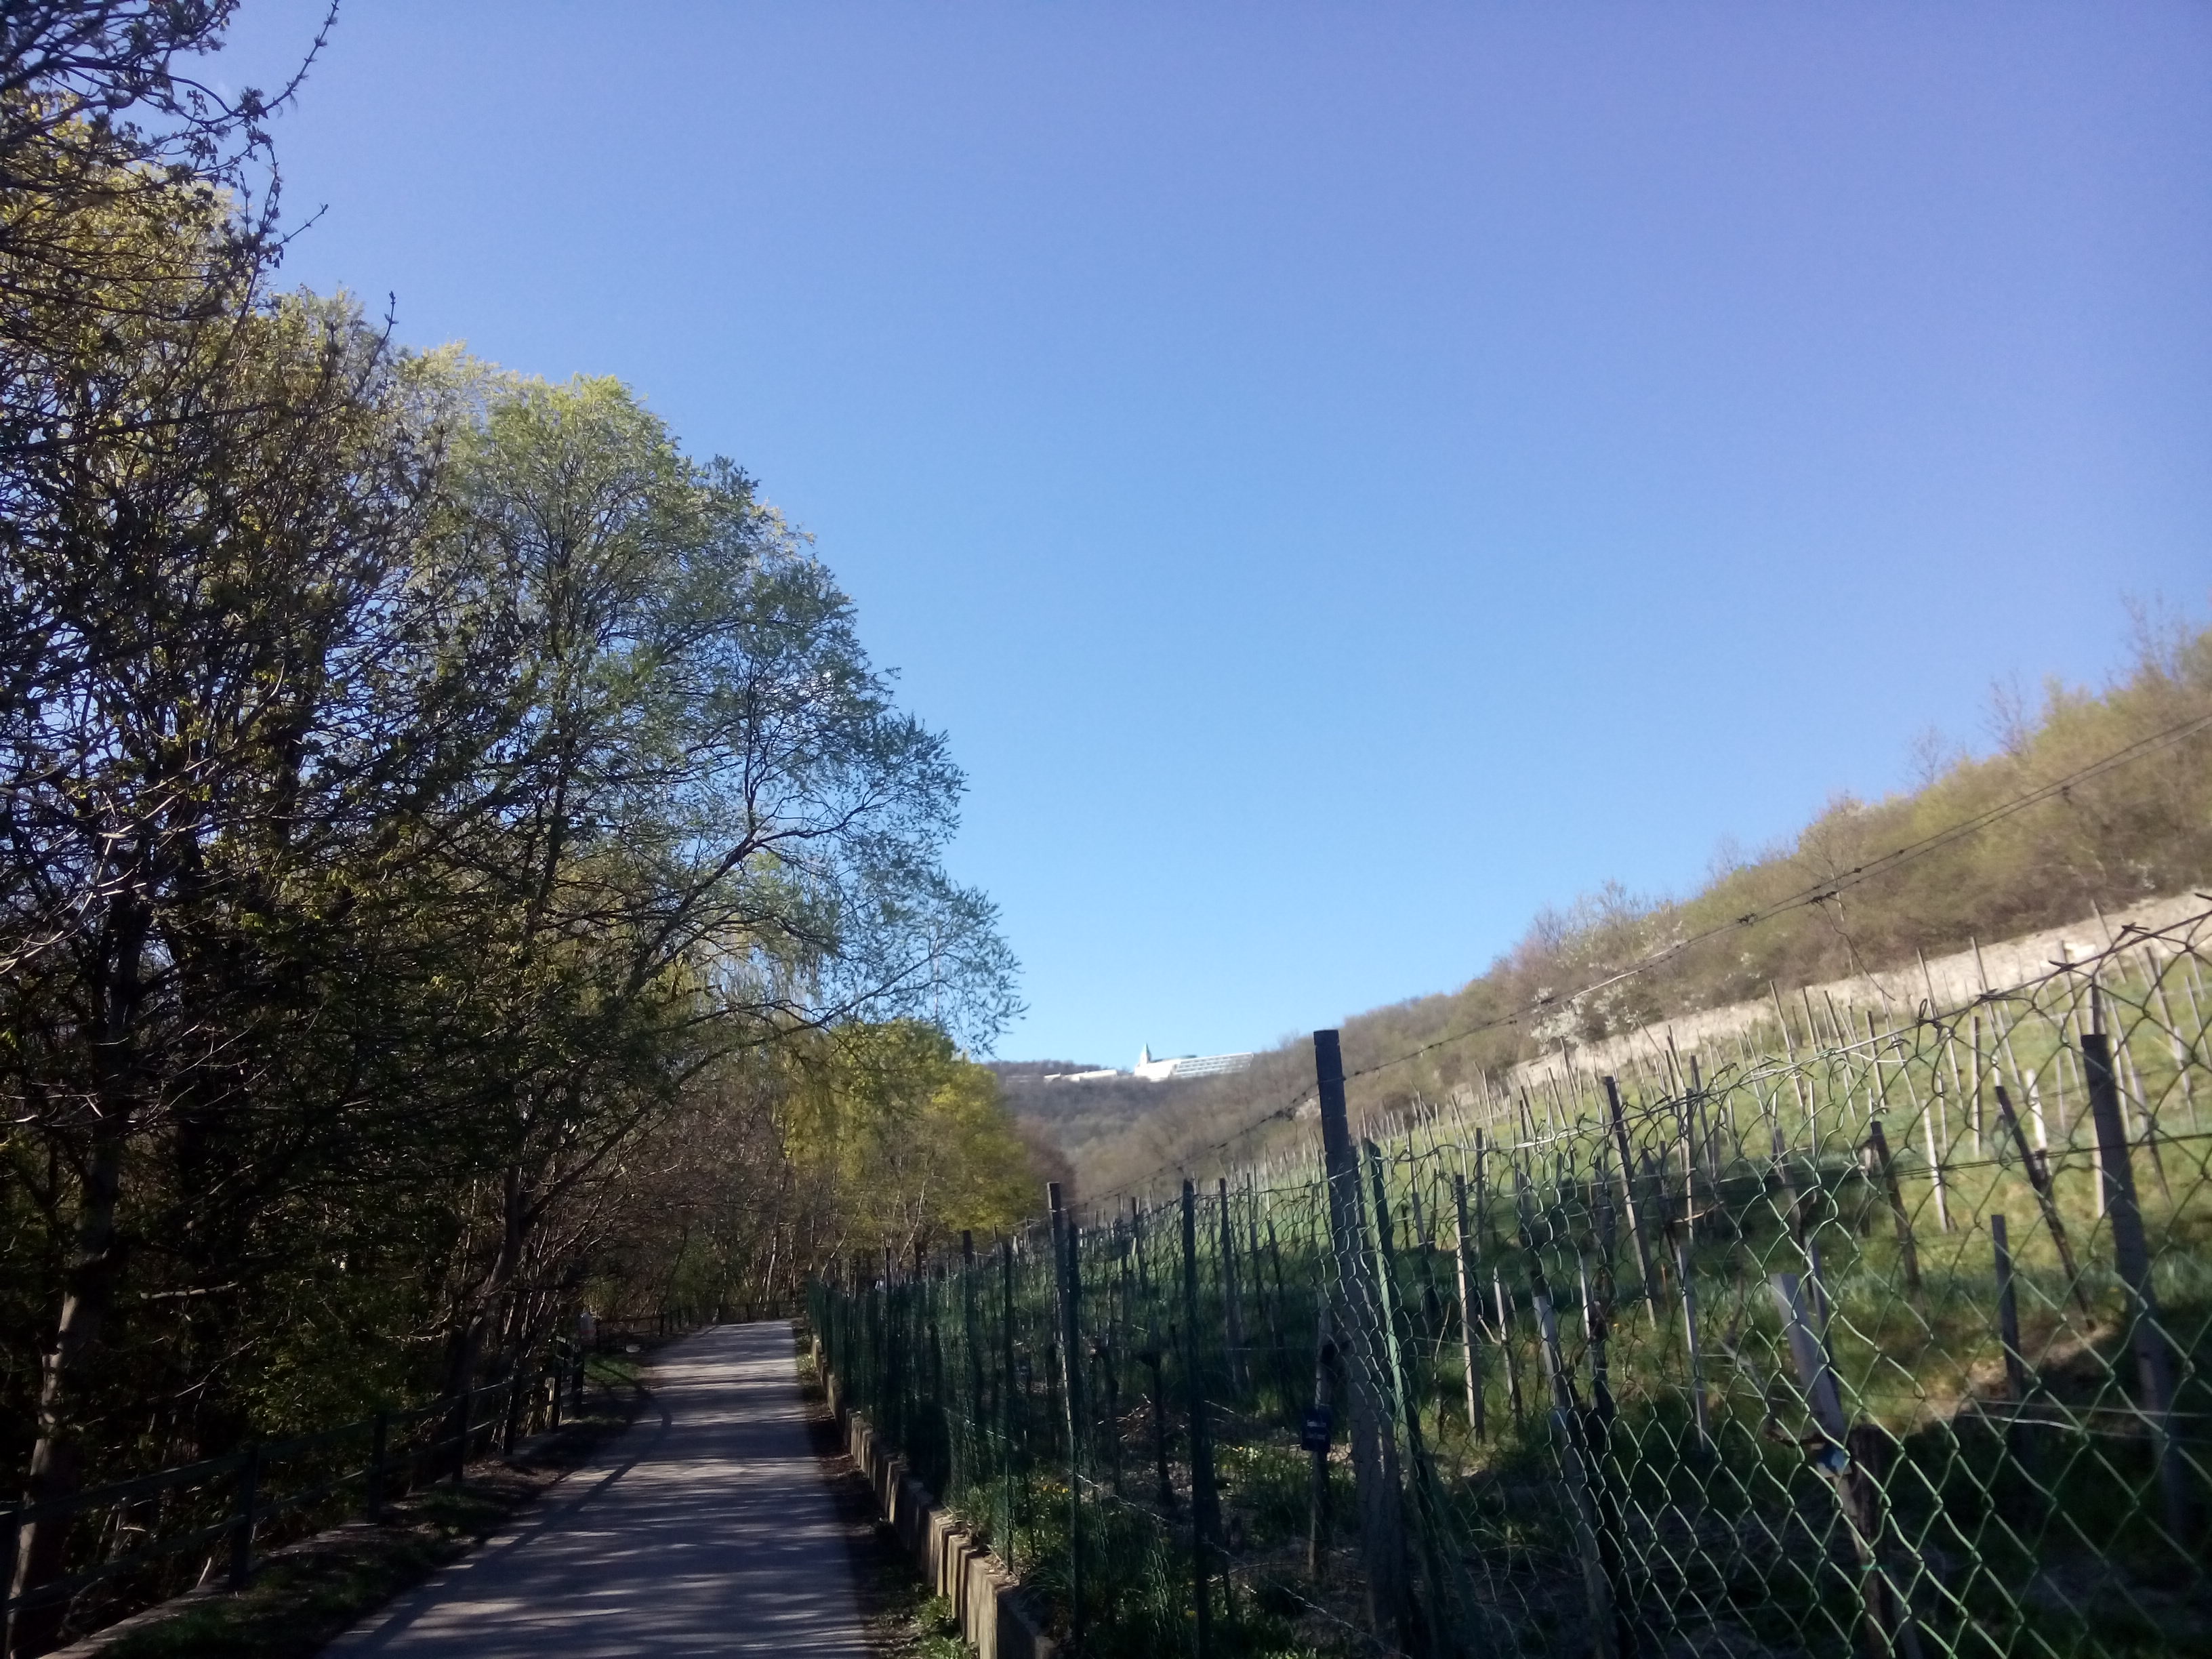 Blue sky, narrow path, fence and vinyards to the right